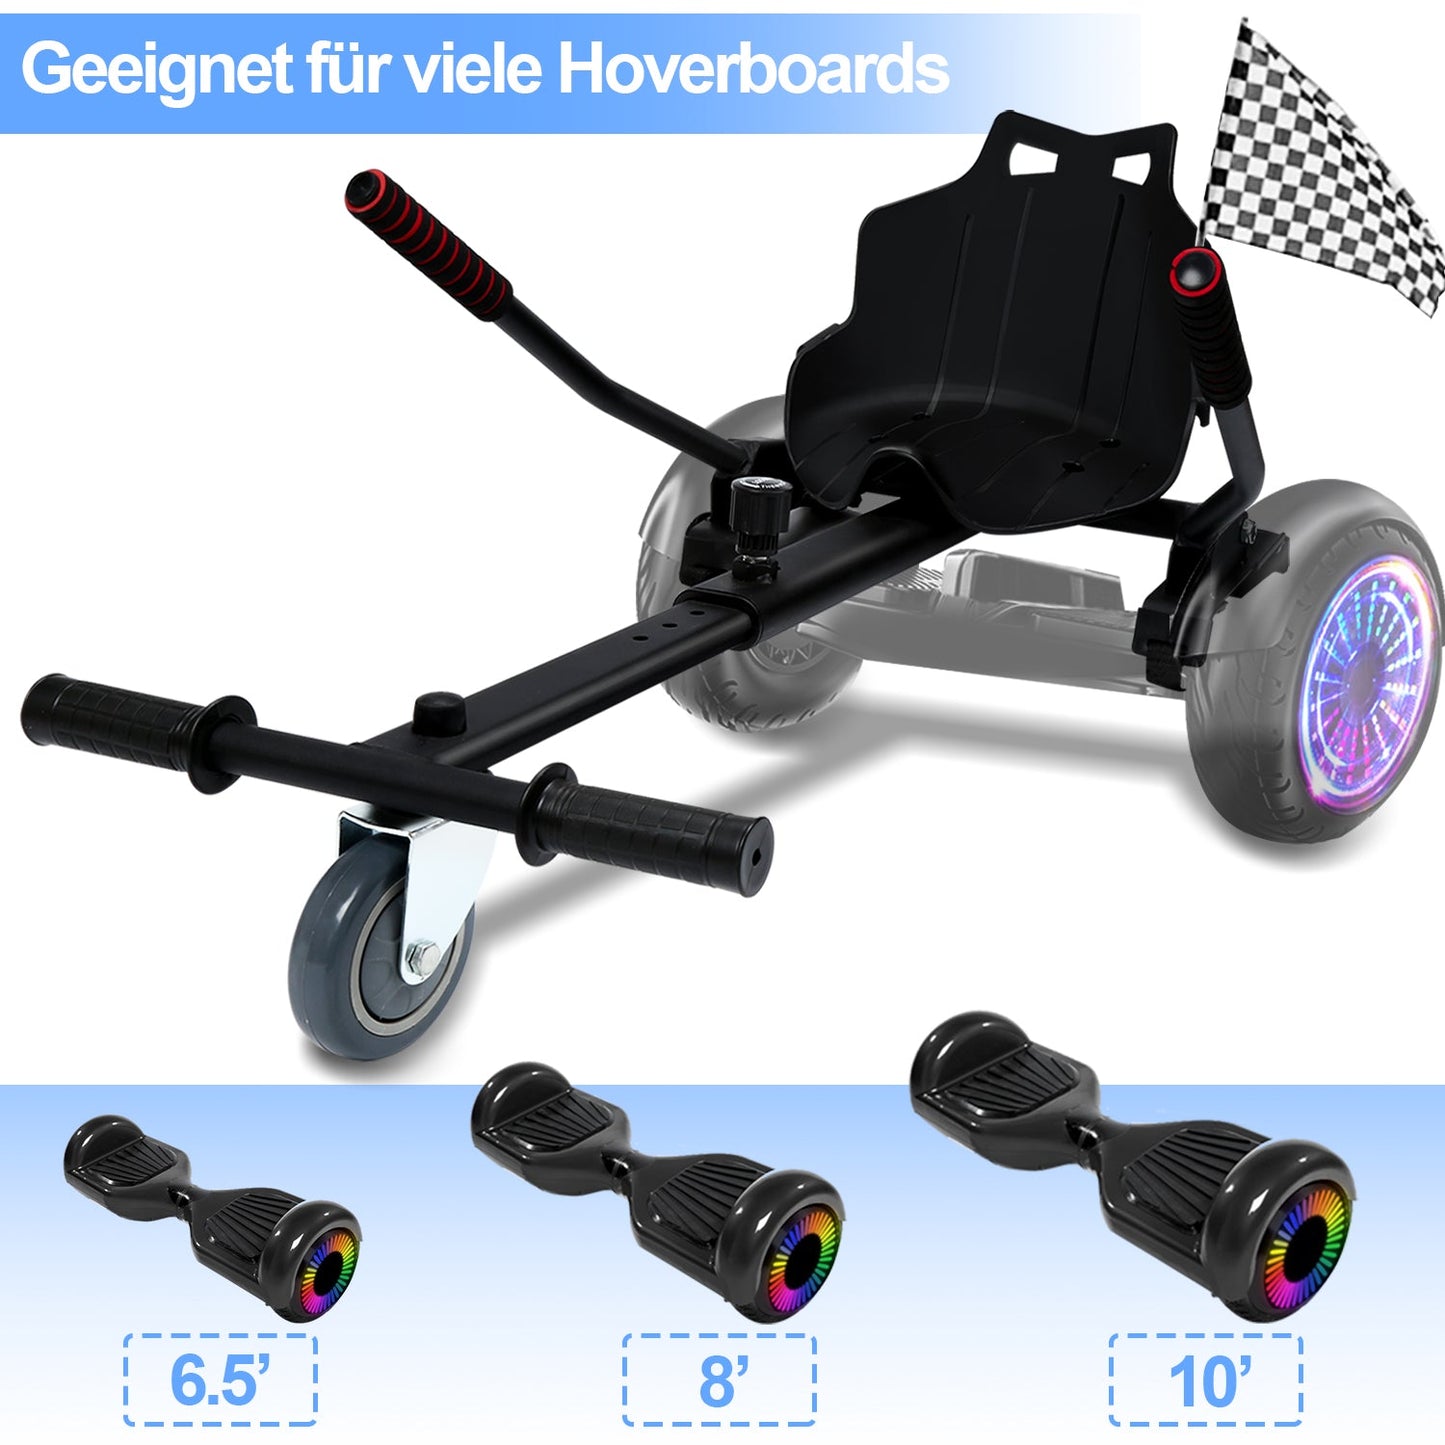 Hoverboard seat kart extension for 2 wheel balancing